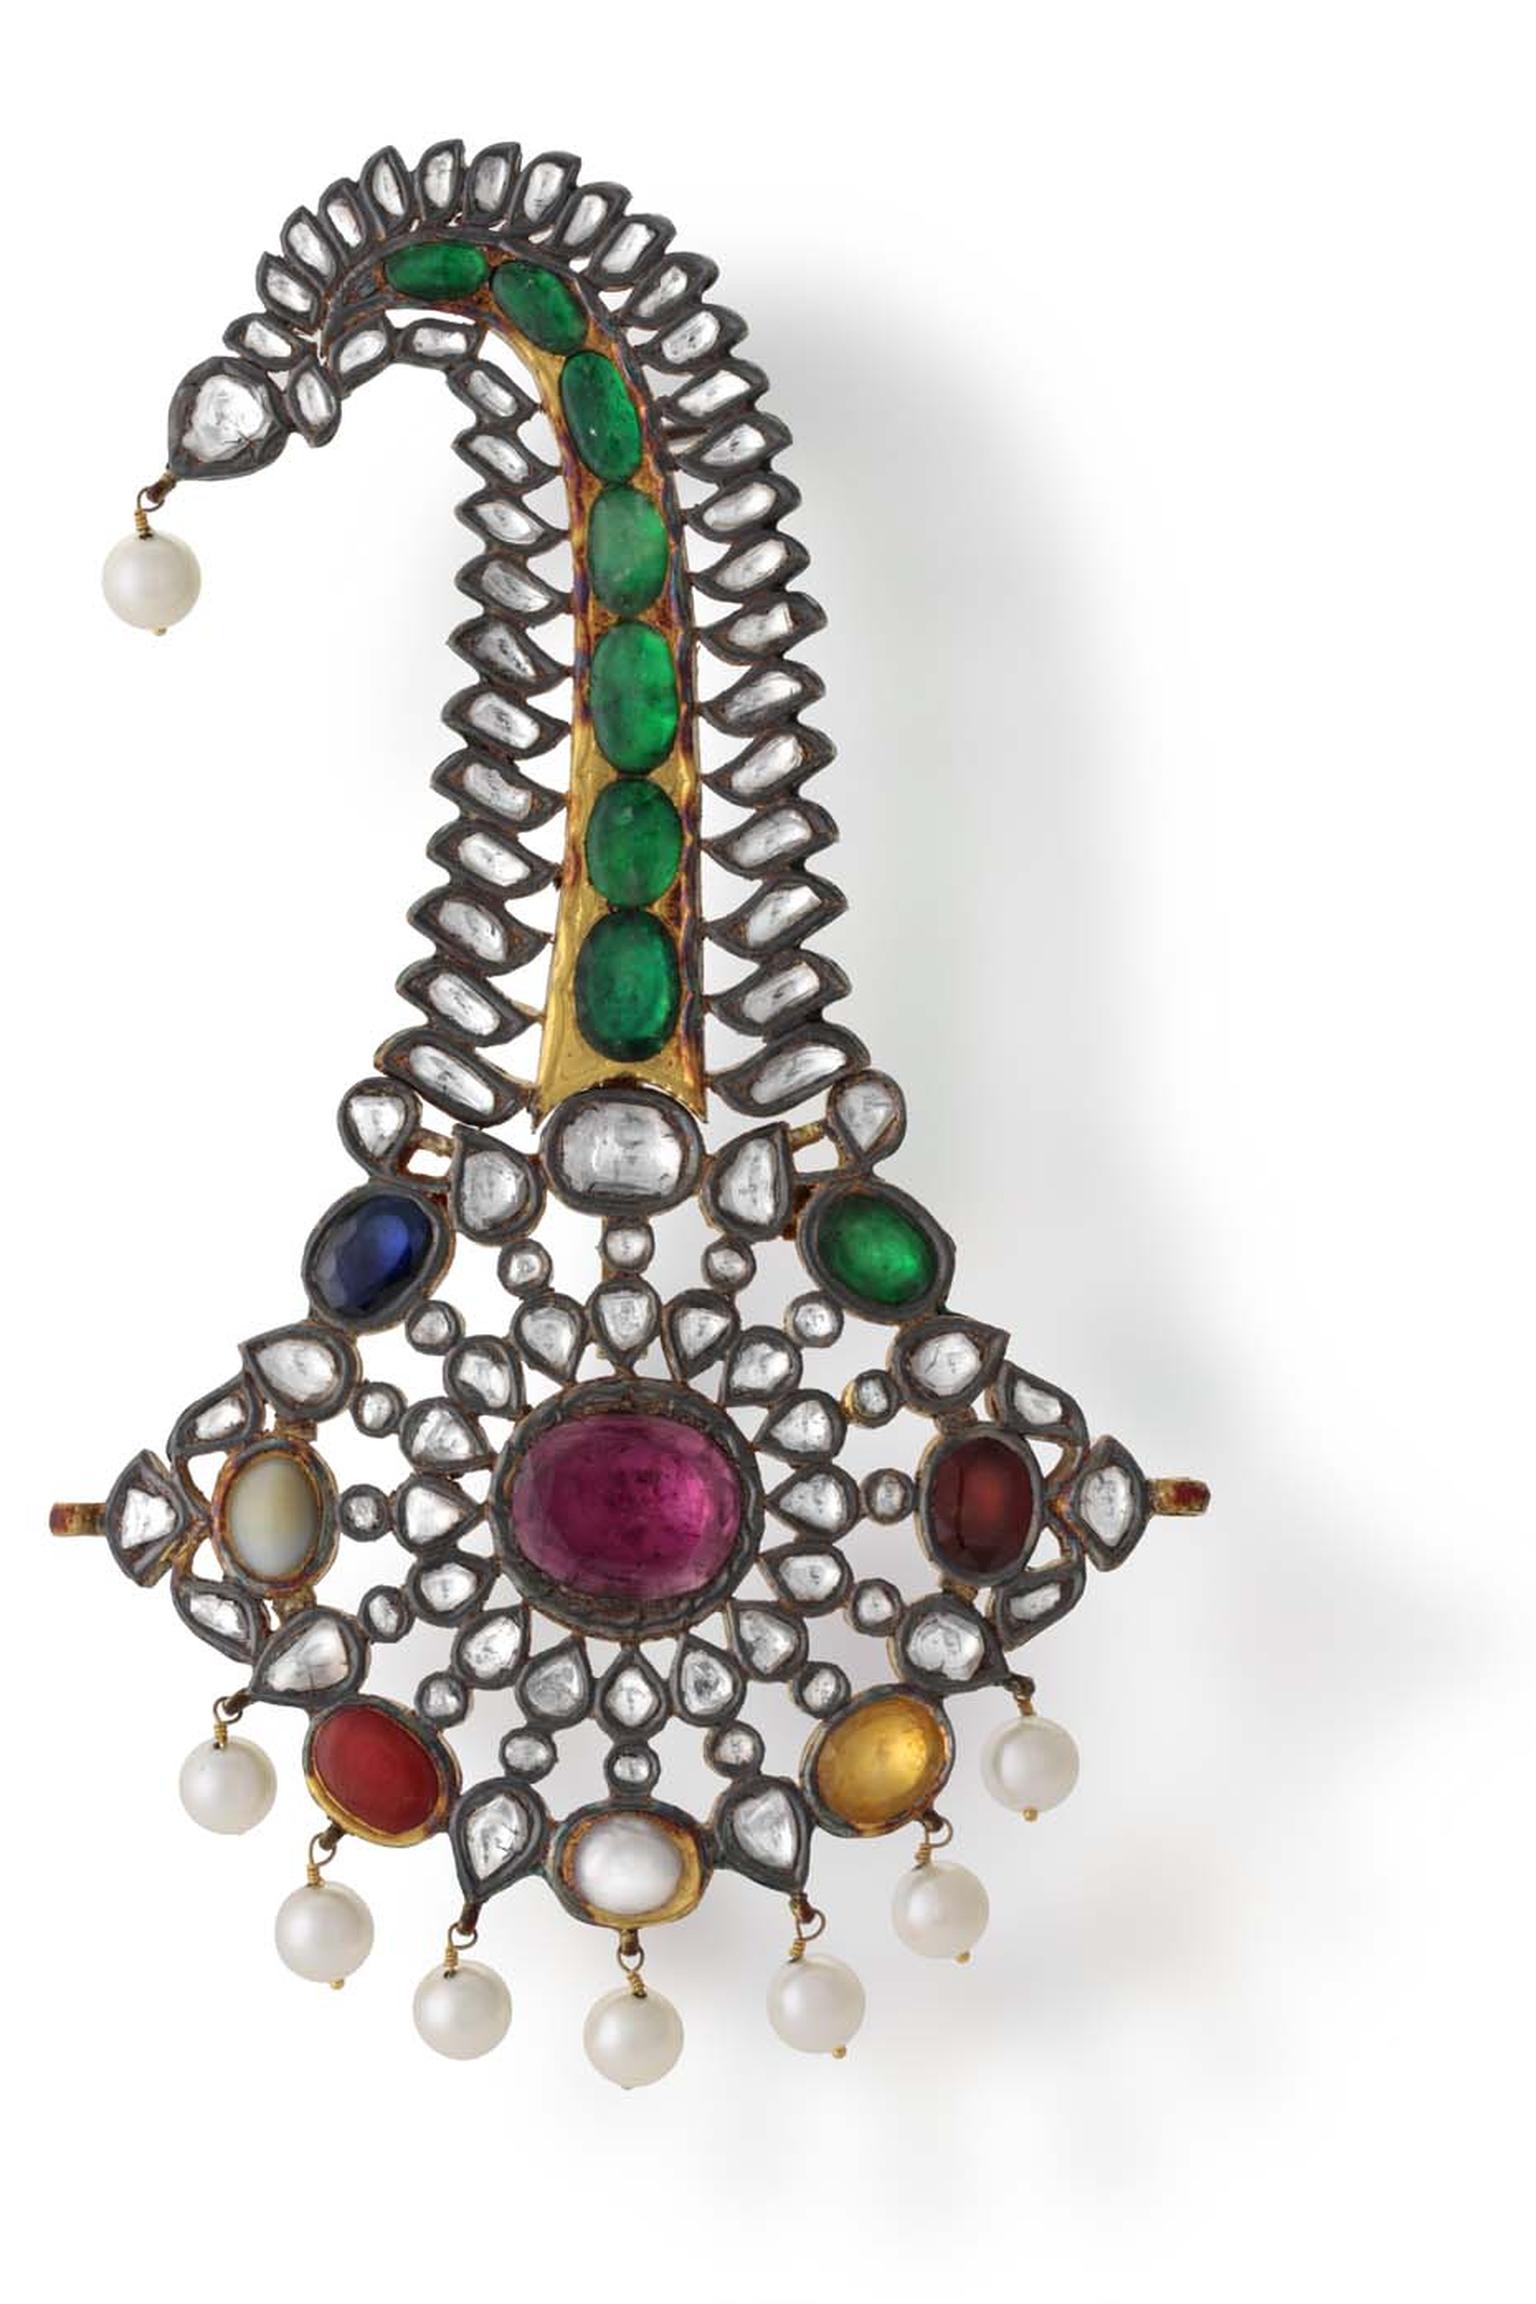 A sacred combination of nine gemstones called a Navratna decorate this Hazoorilal sarpech, which is designed to be worn by a groom on his wedding day.